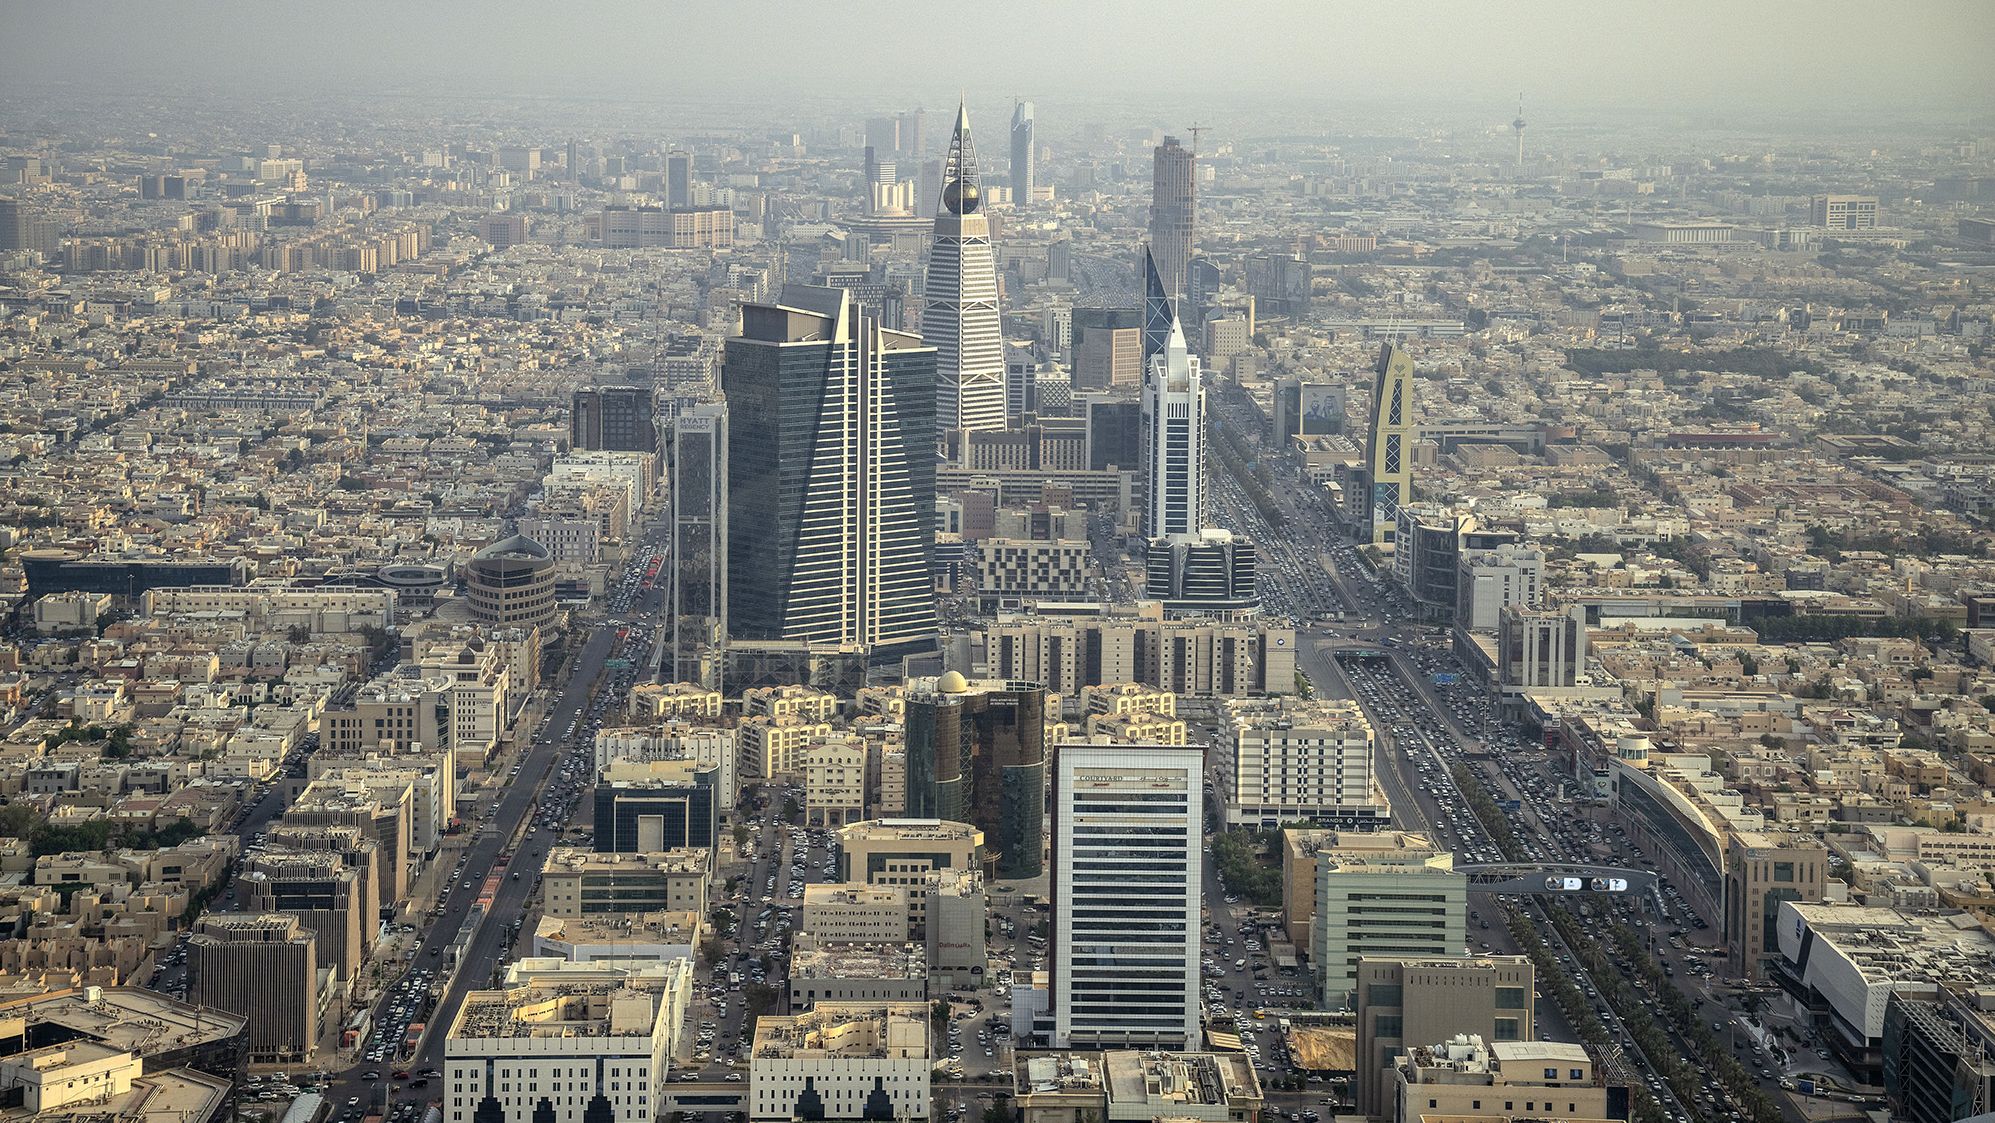 RIYADH, SAUDI ARABIA - OCTOBER 31: The Skyline of Riyadh is seen on October 31, 2023 in Riyadh, Saudi Arabia. Saudi Arabia is set to host the men's 2034 World Cup after Fifa confirmed it was the only bidder for the tournament.  (Photo by Justin Setterfield/Getty Images)